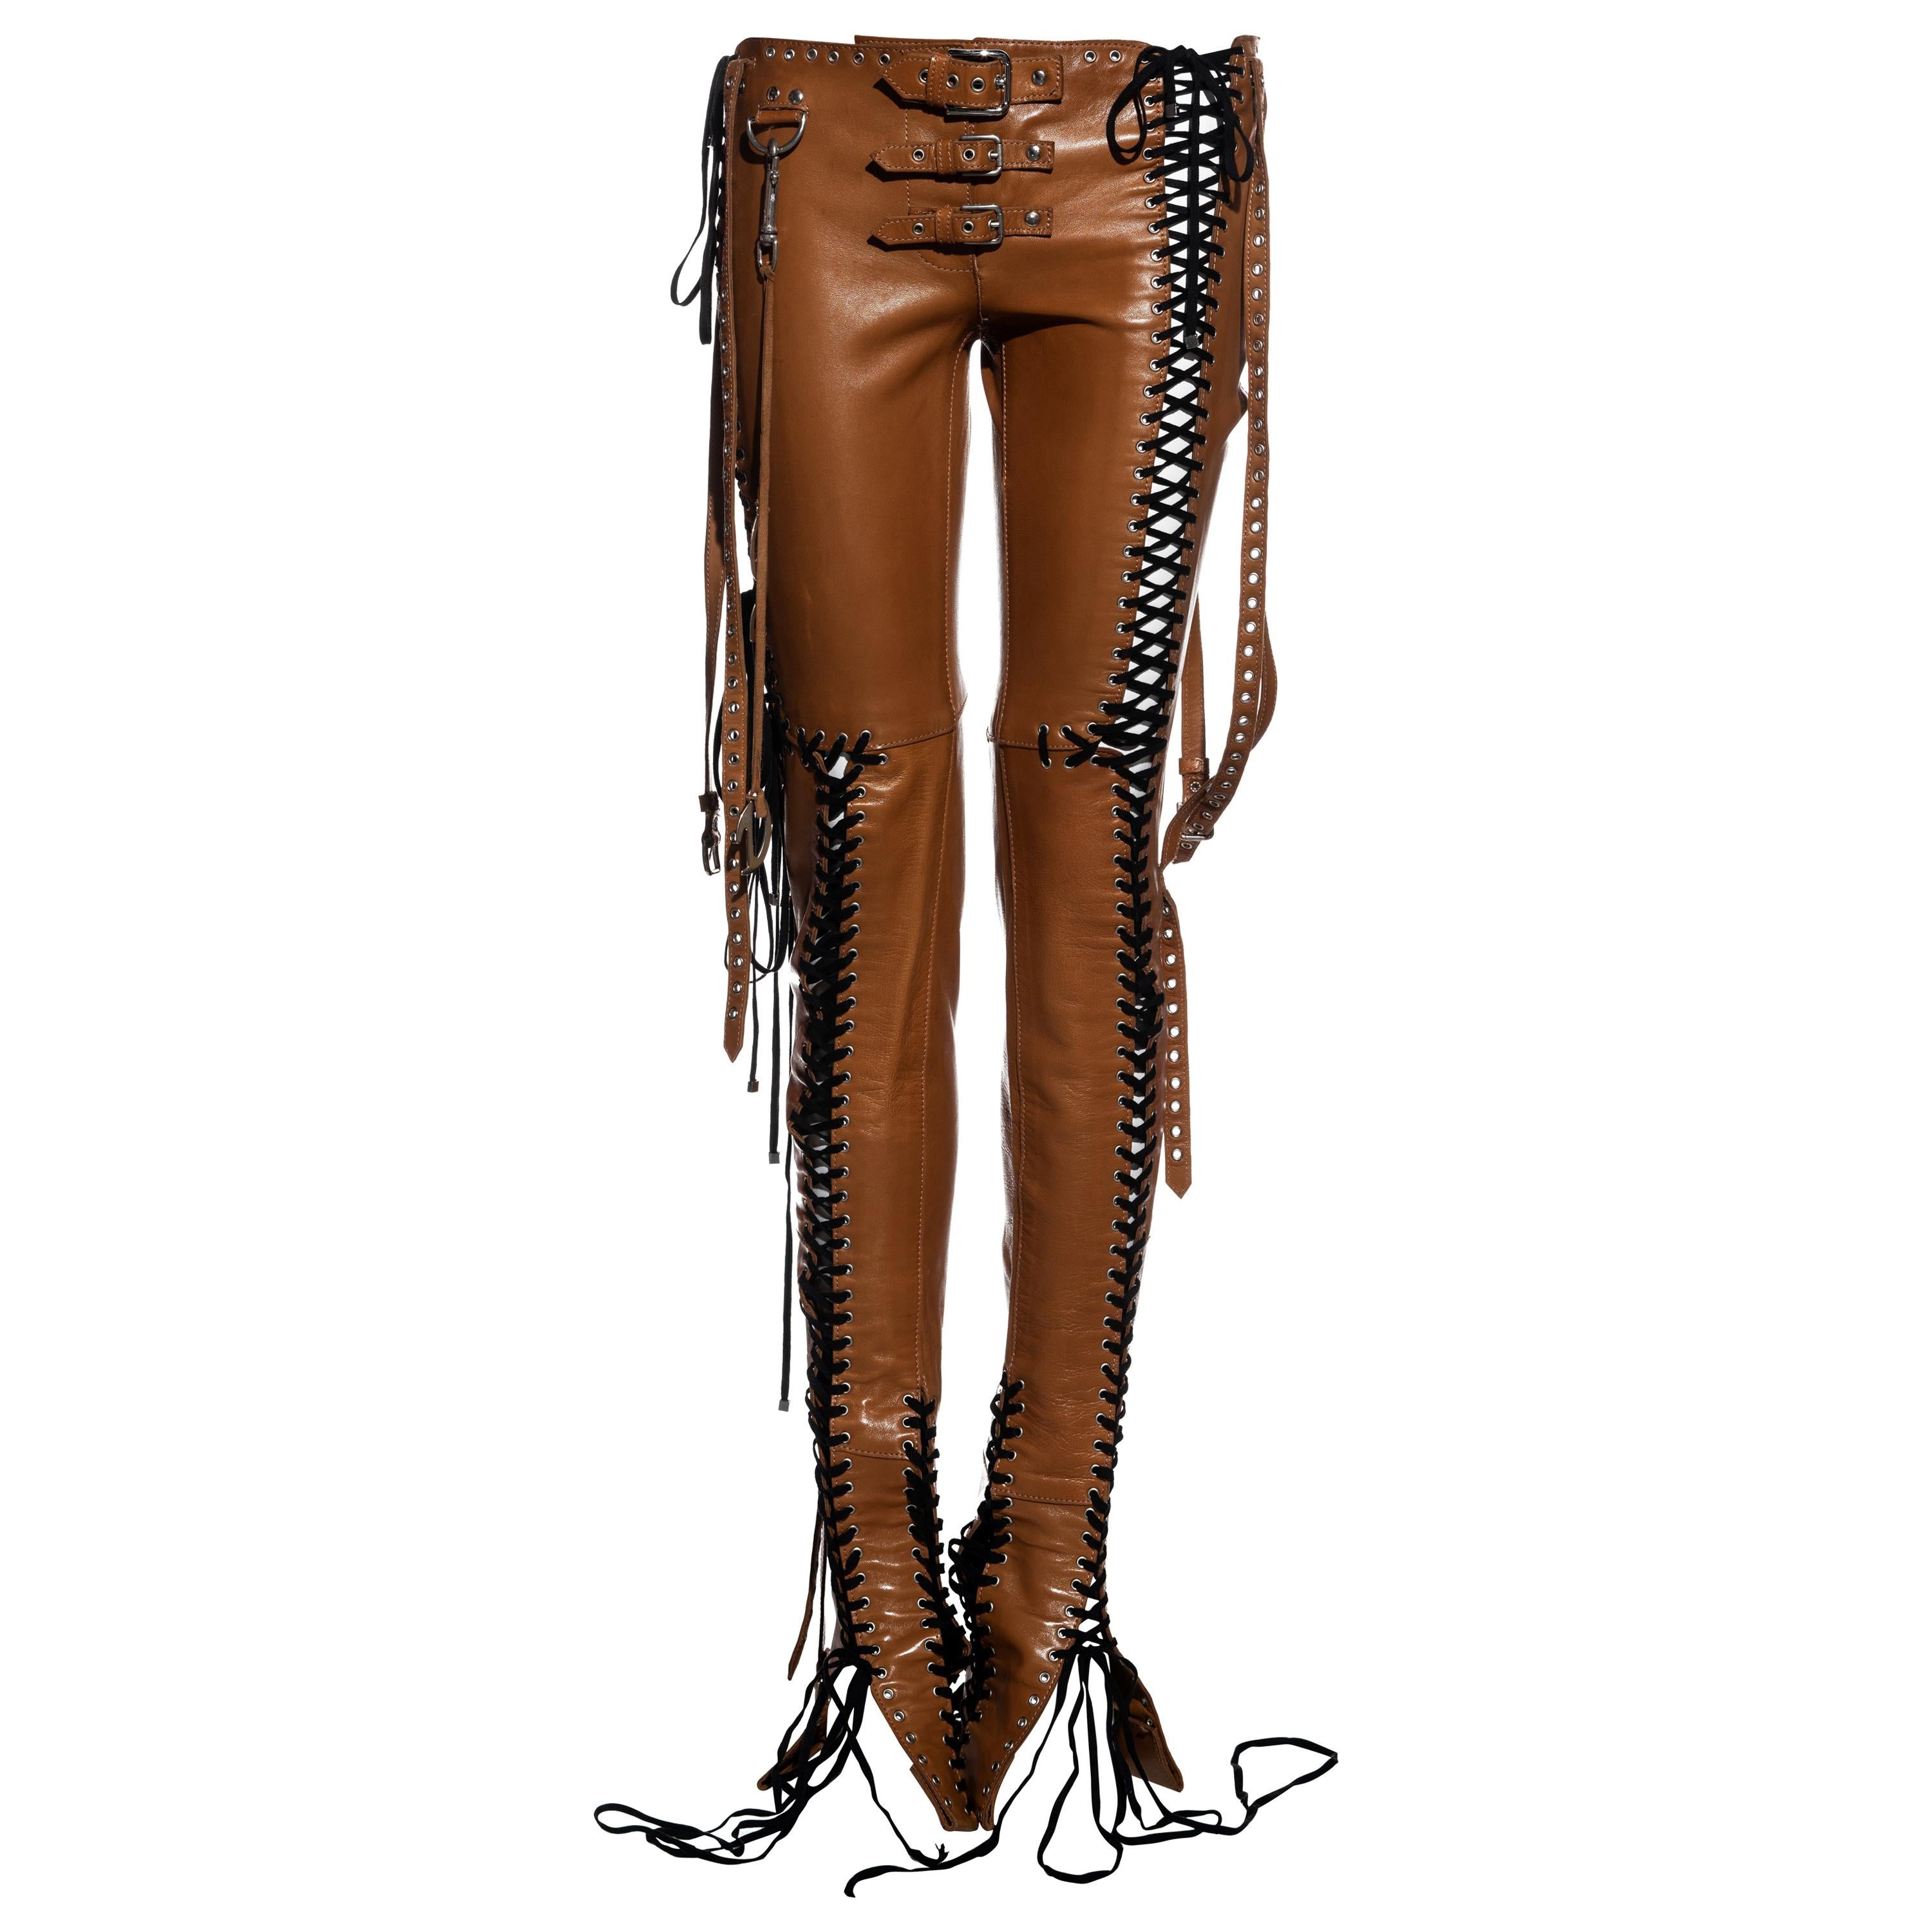 Dolce & Gabbana tan lace up leather pants, ss 2003